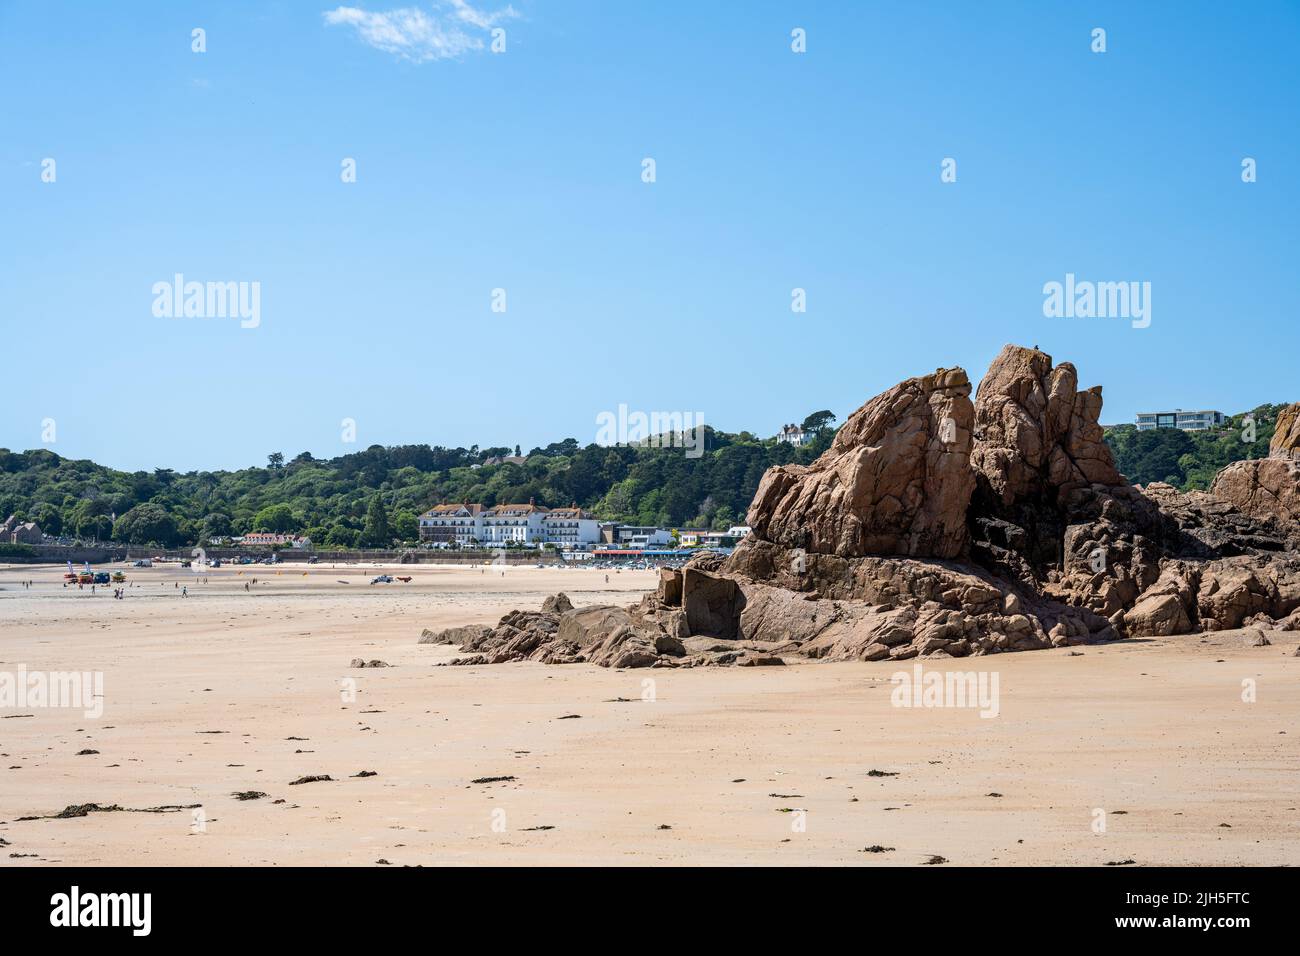 The beach and coastline of St Brelade's Bay, St Brelade in the south-west of the British Crown Dependency of Jersey, Channel Islands, British Isles. Stock Photo